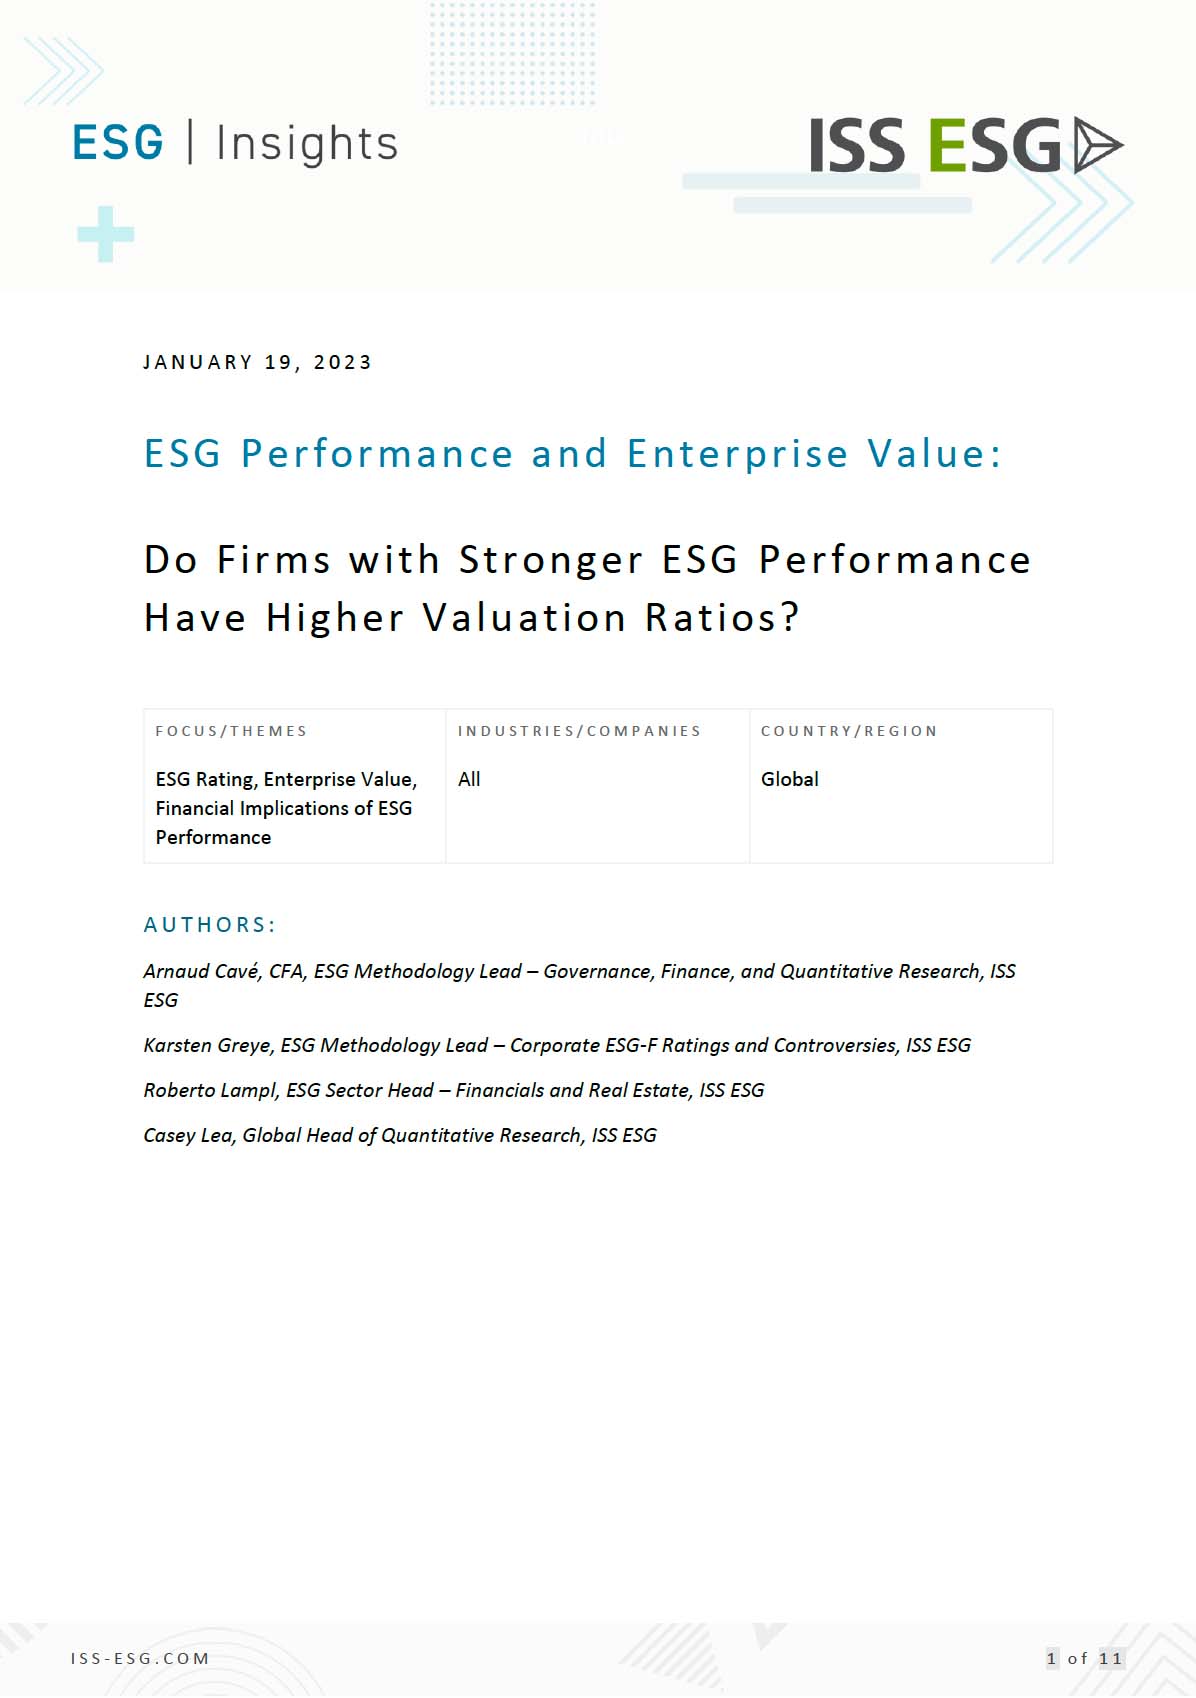 ESG Performance and Enterprise Value: Do Firms with Stronger ESG Performance Have Higher Valuation Ratios?